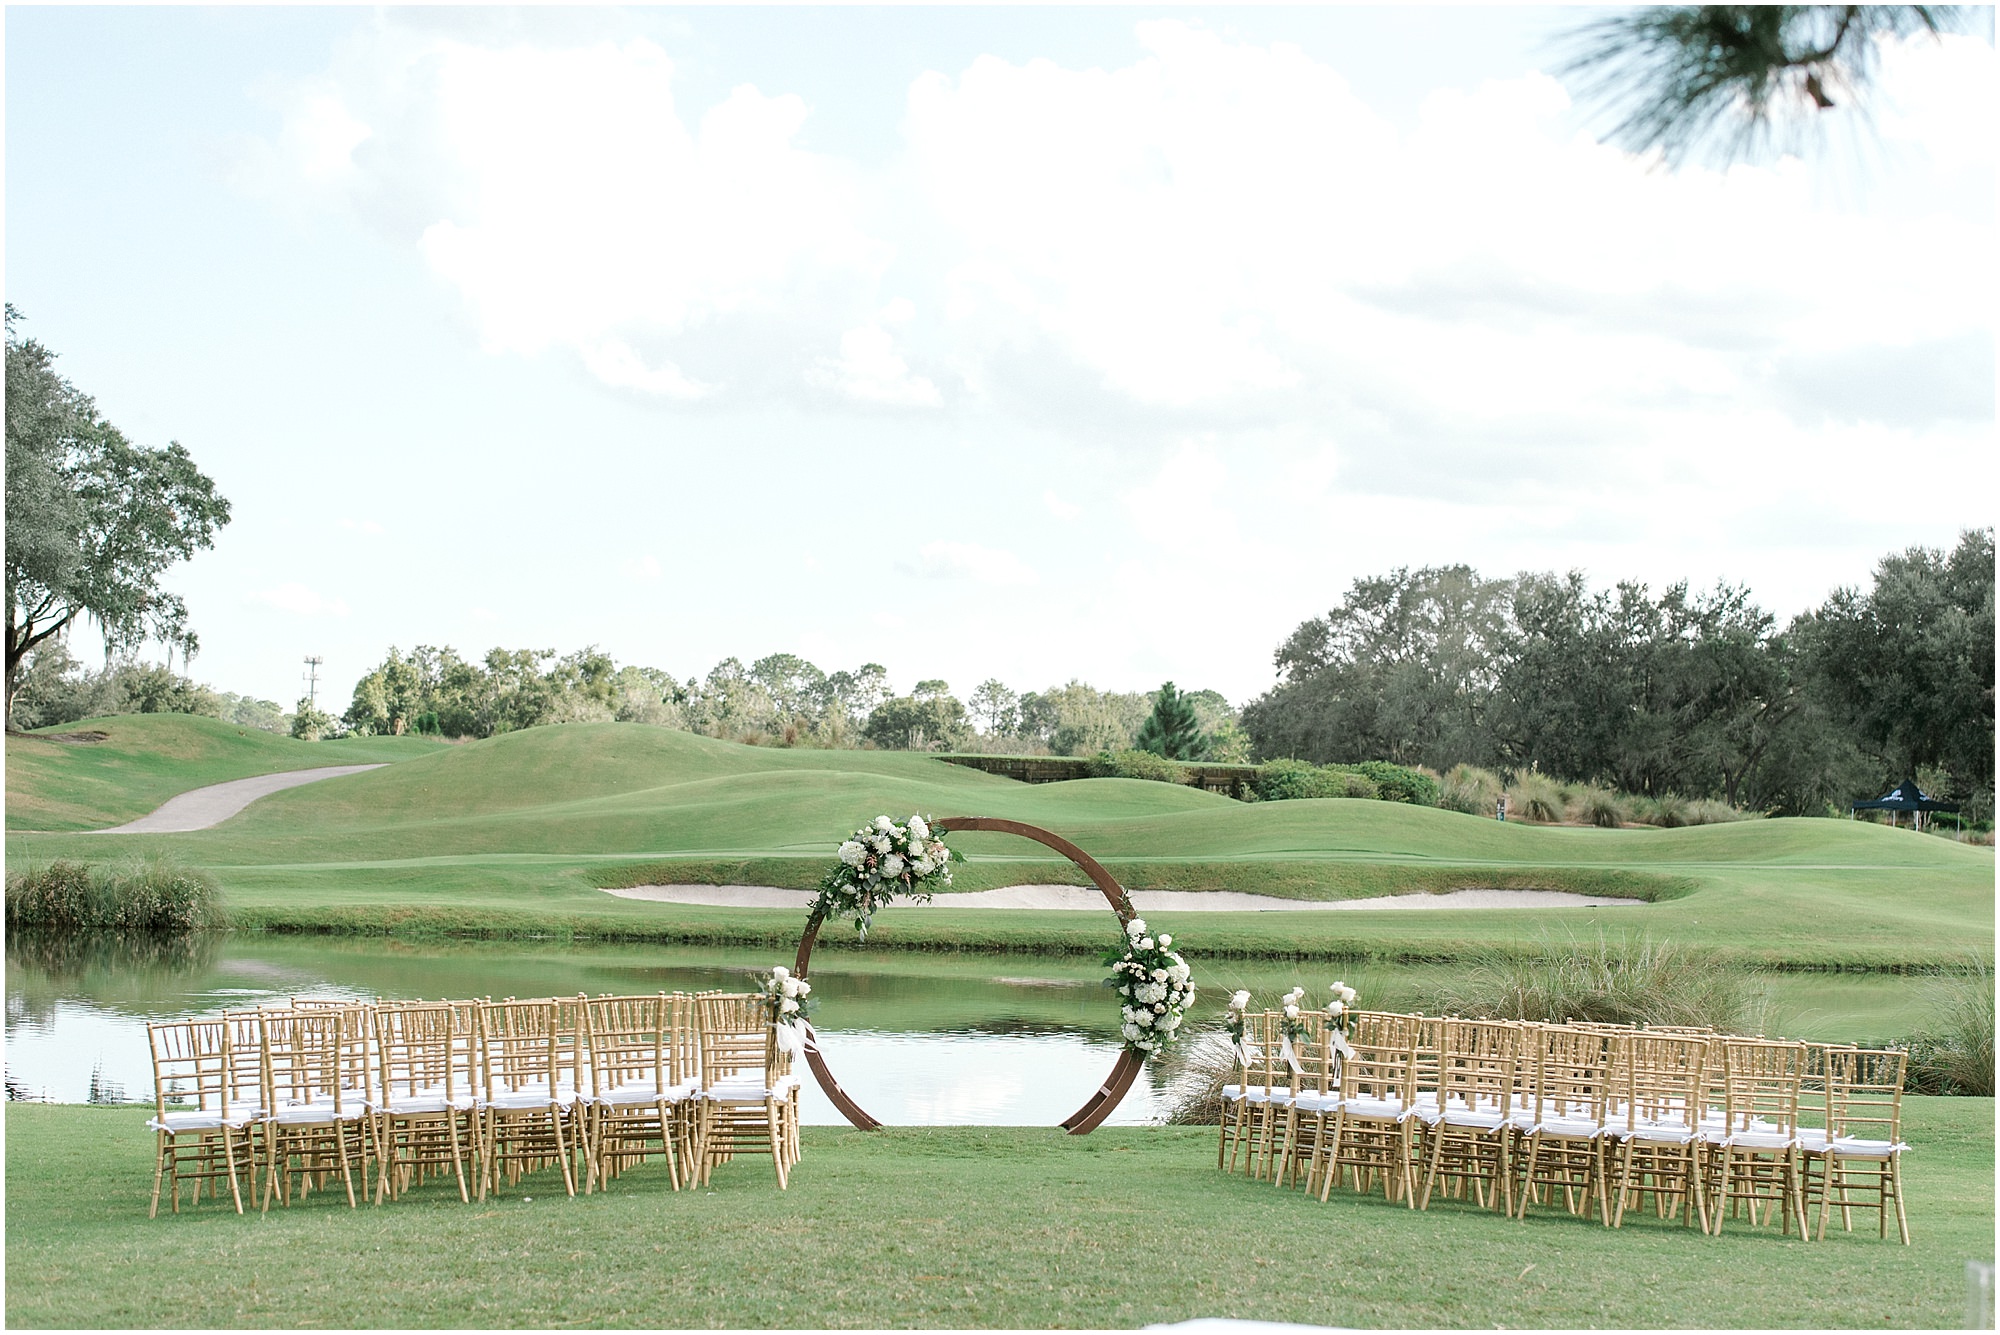 Outdoor ceremony space at the villas of grand cypress overlooking the lake